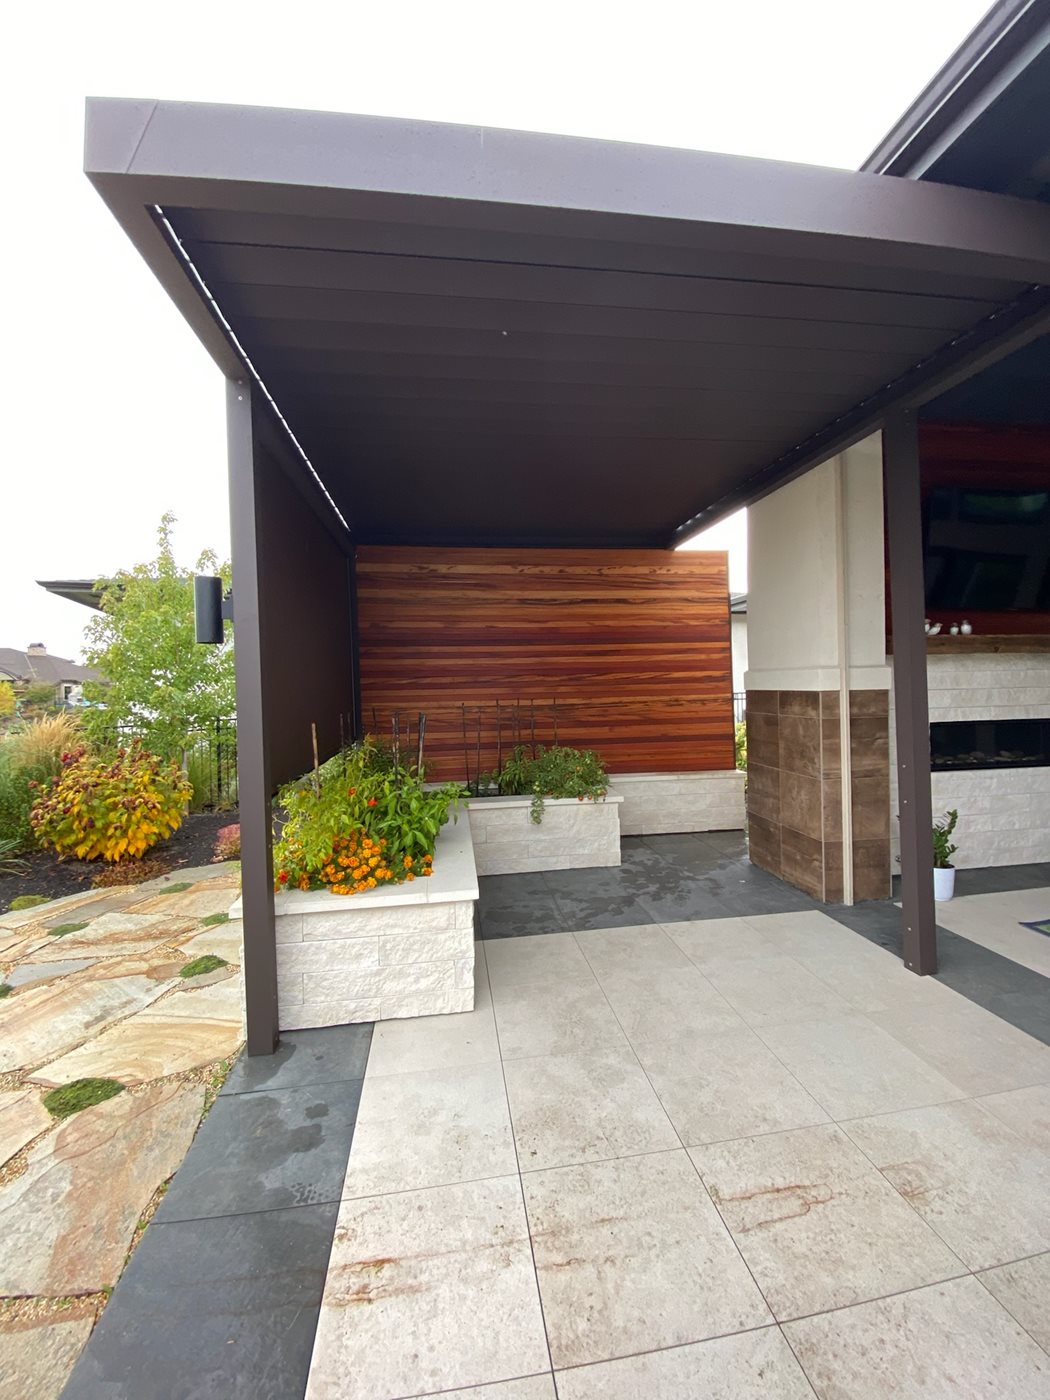 Cantilevered-Residential-Alba-in-Idaho-by-Blind-Appeal-(7).JPG